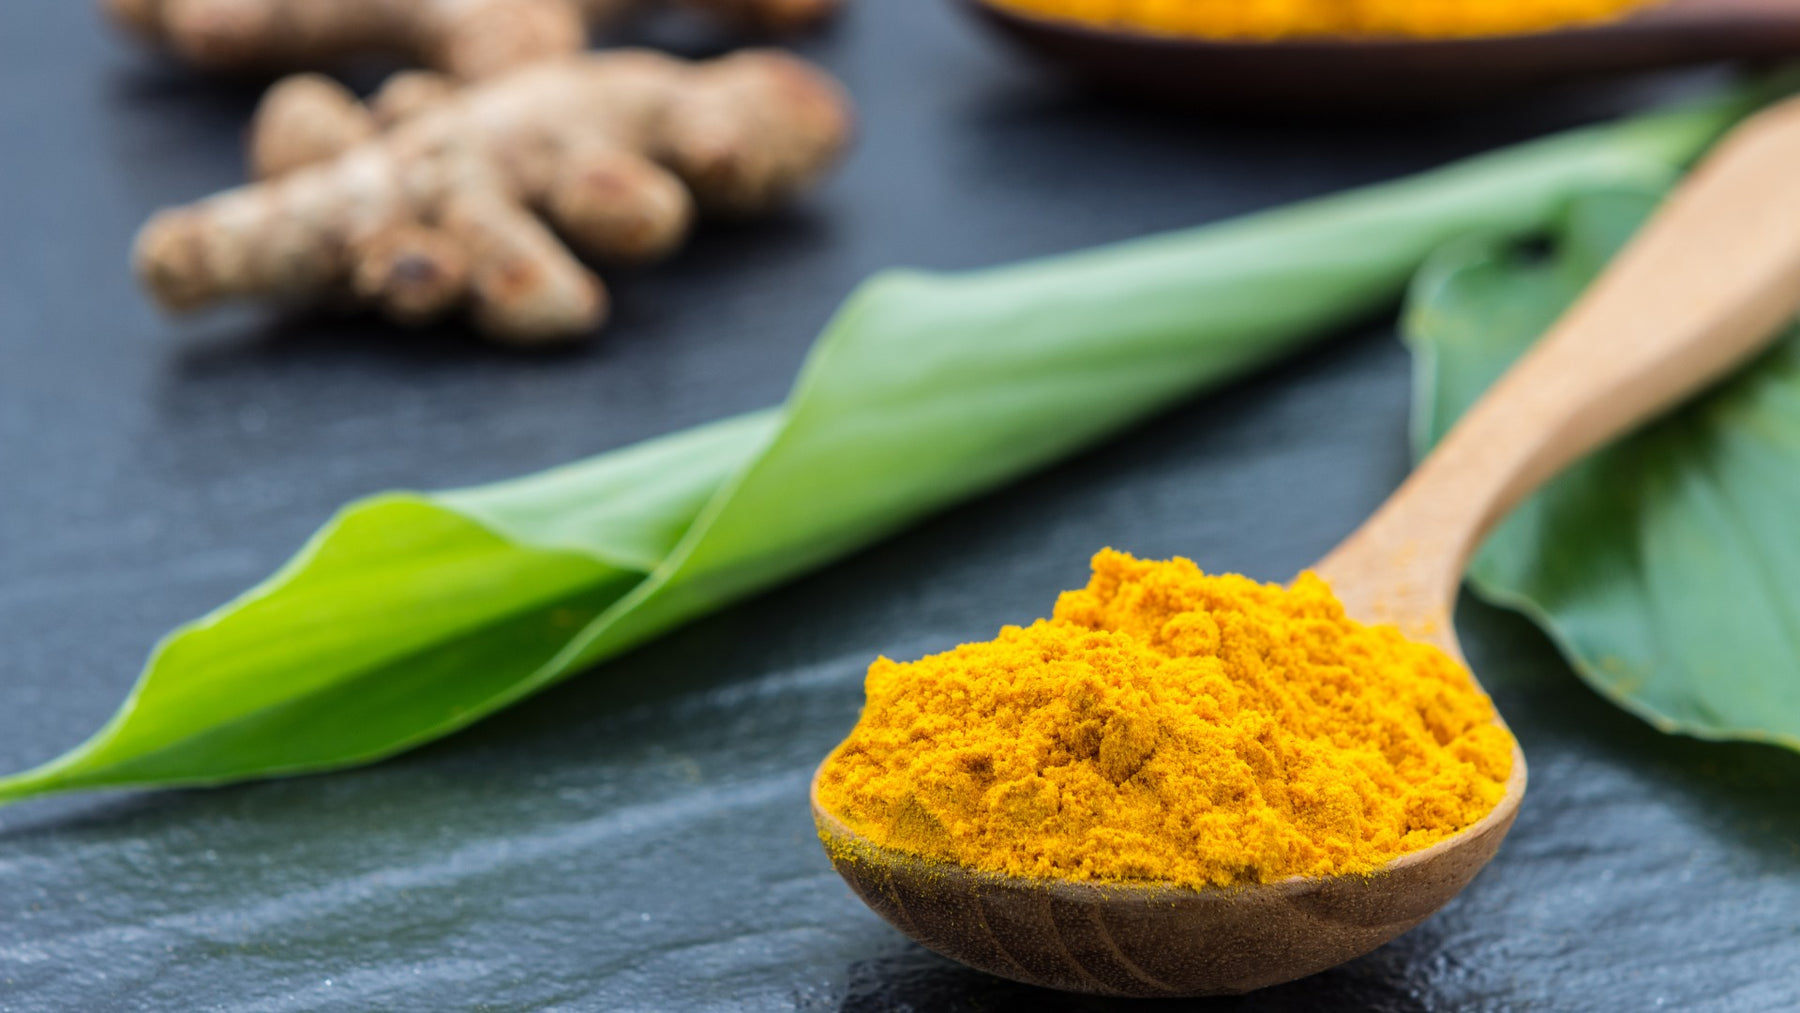 Guide to Curcumin - Benefits, Dosage, Side Effects